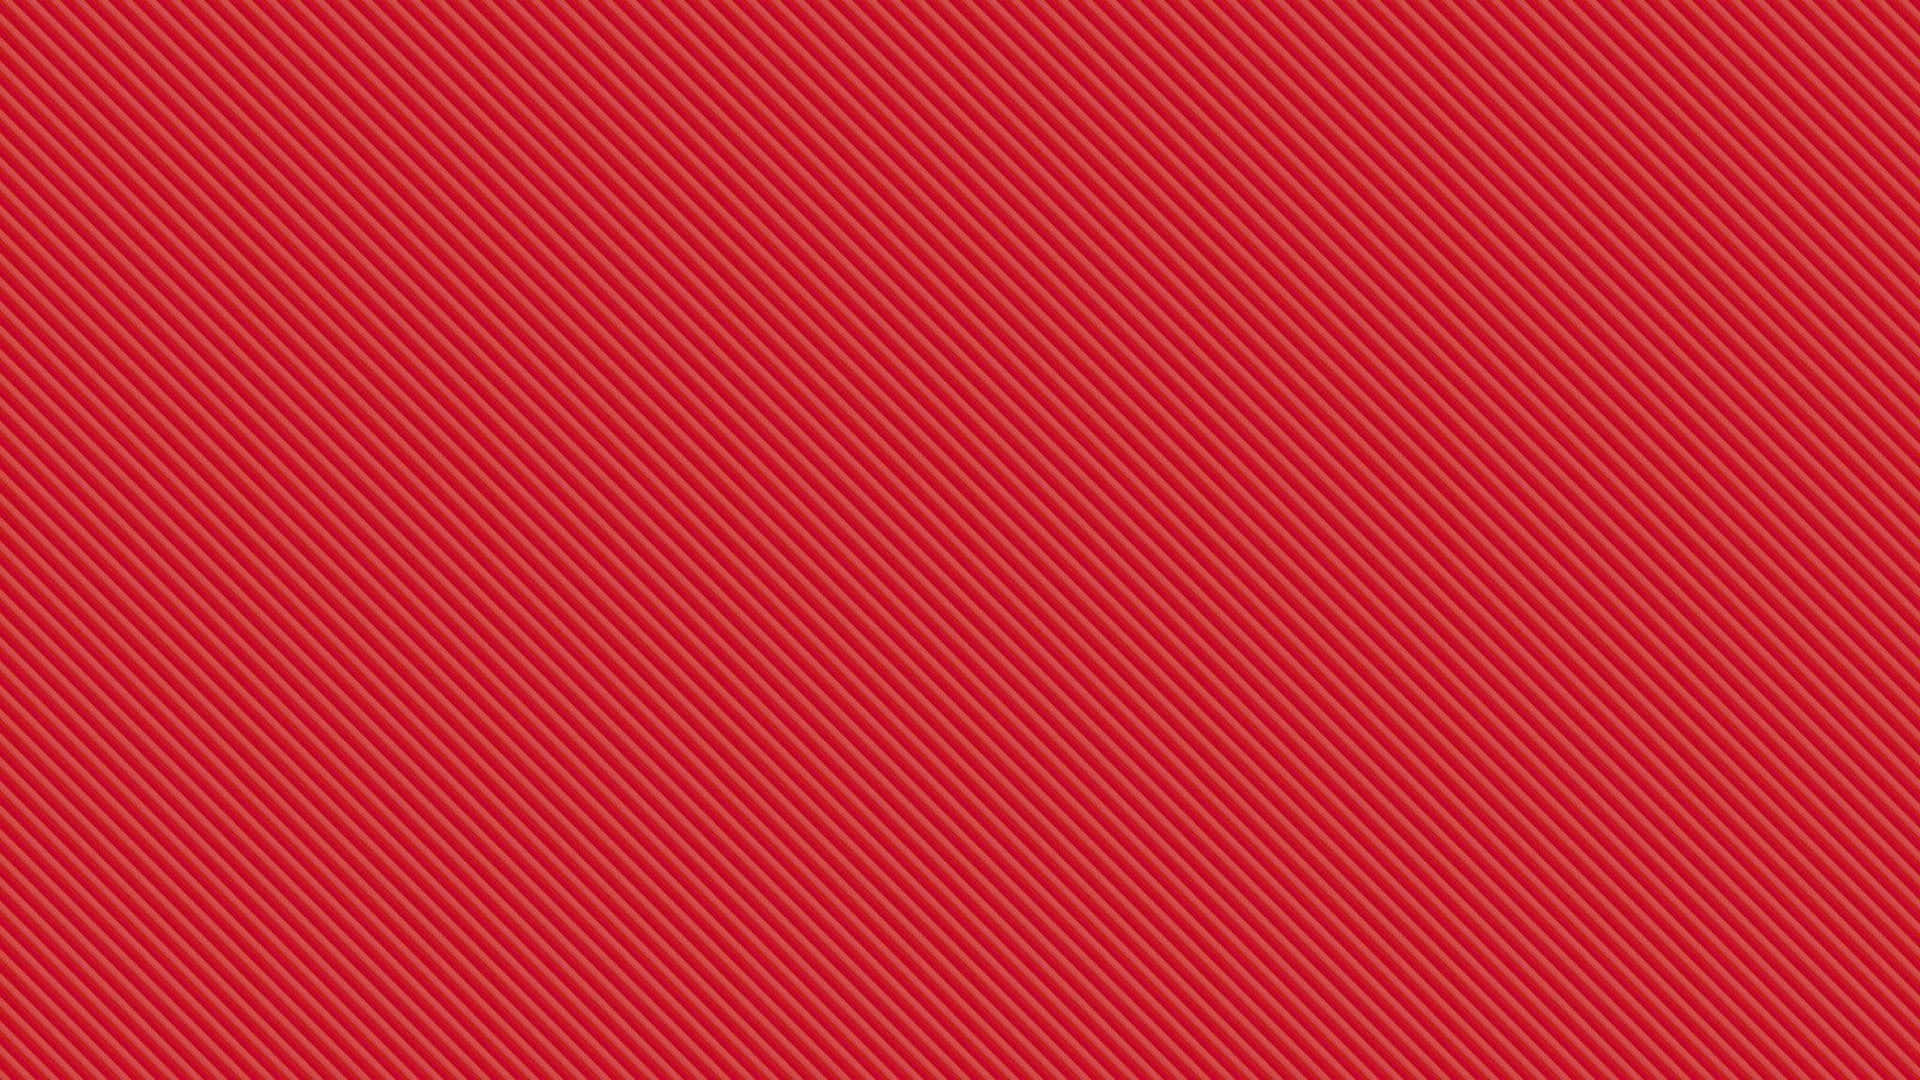 Rich, Vibrant Light Red Background